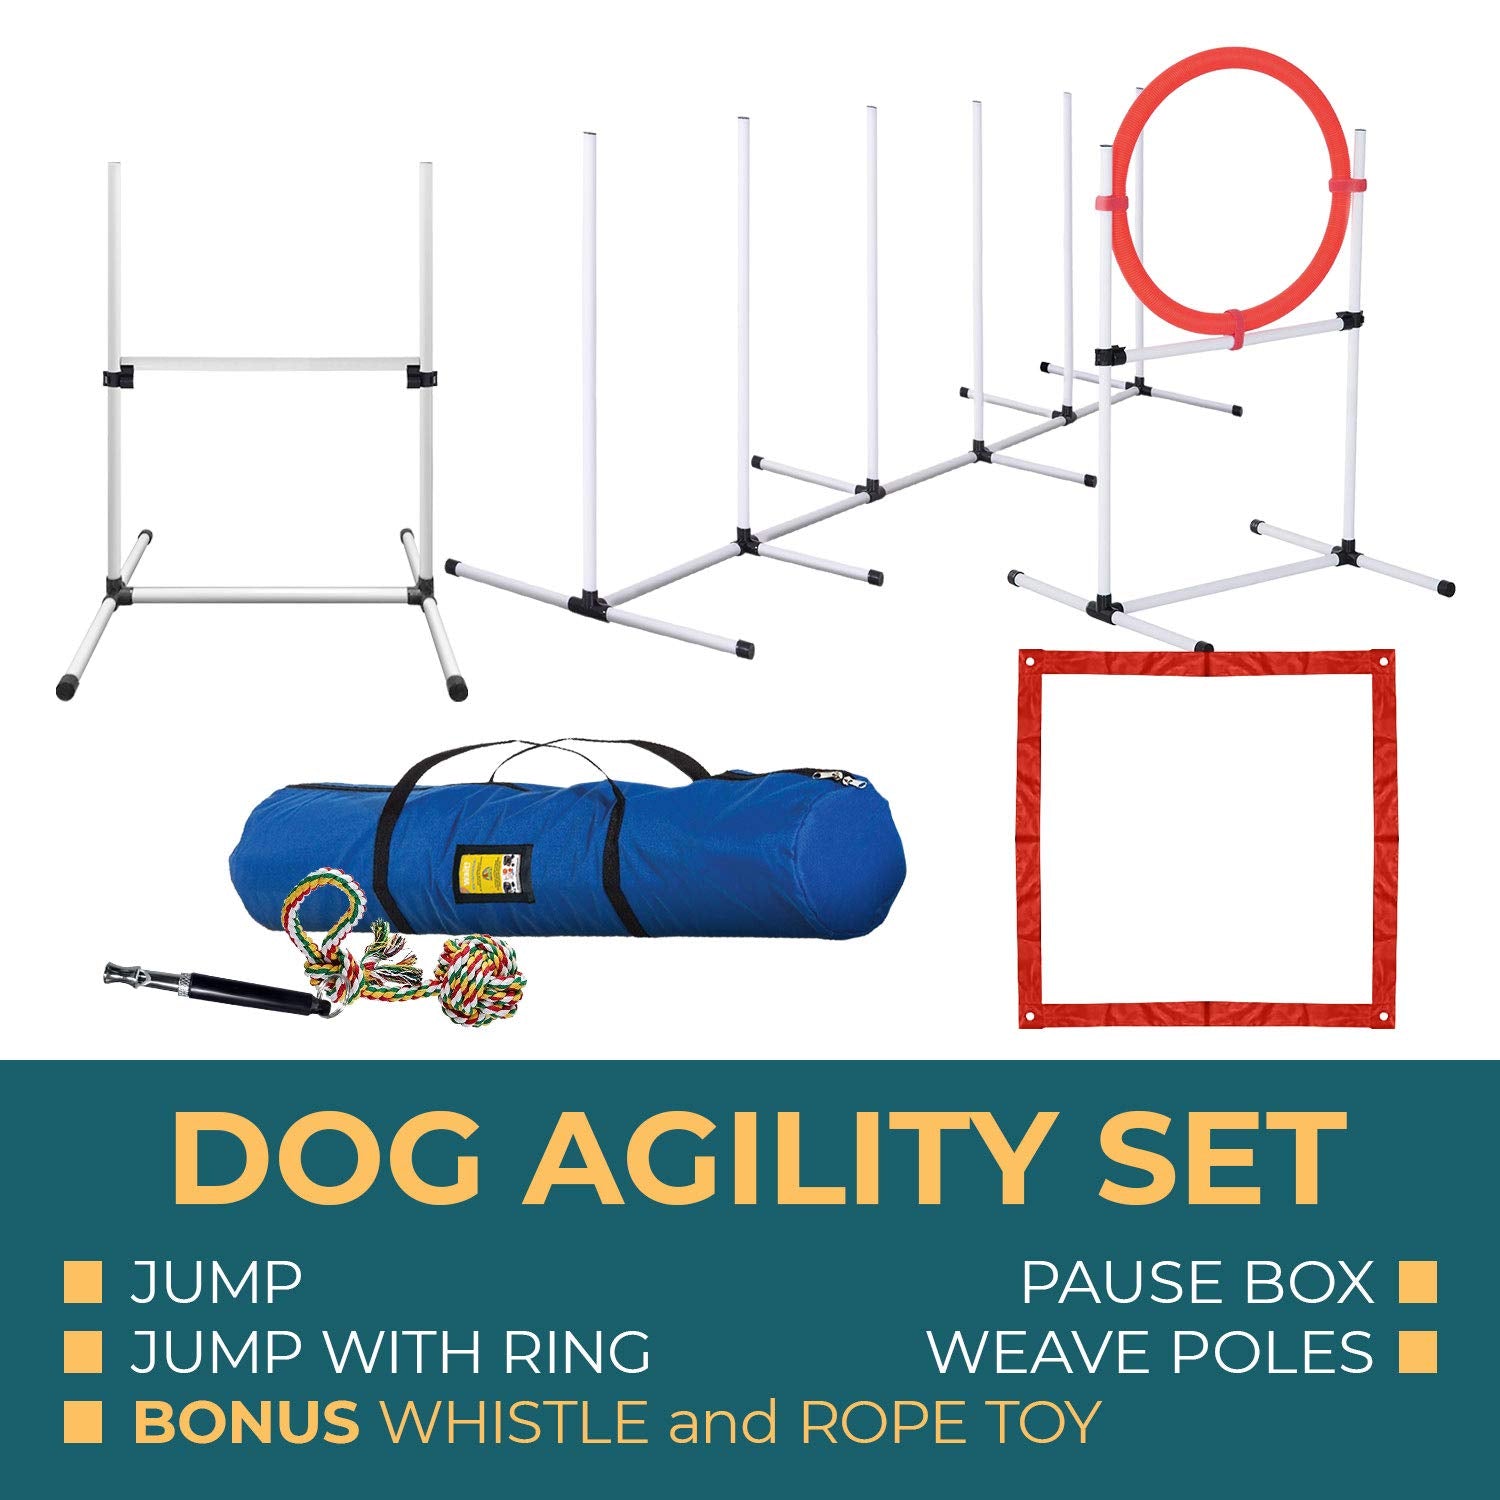 CHEERING PET, Premium Dog Agility Equipment Set, 5 Pieces of Dog Training Fun, Tunnel, Dog Jump, Hoop, Weave Poles and Easy Carry Case Indoor or Outdoor Dog Agility Training  - Like New